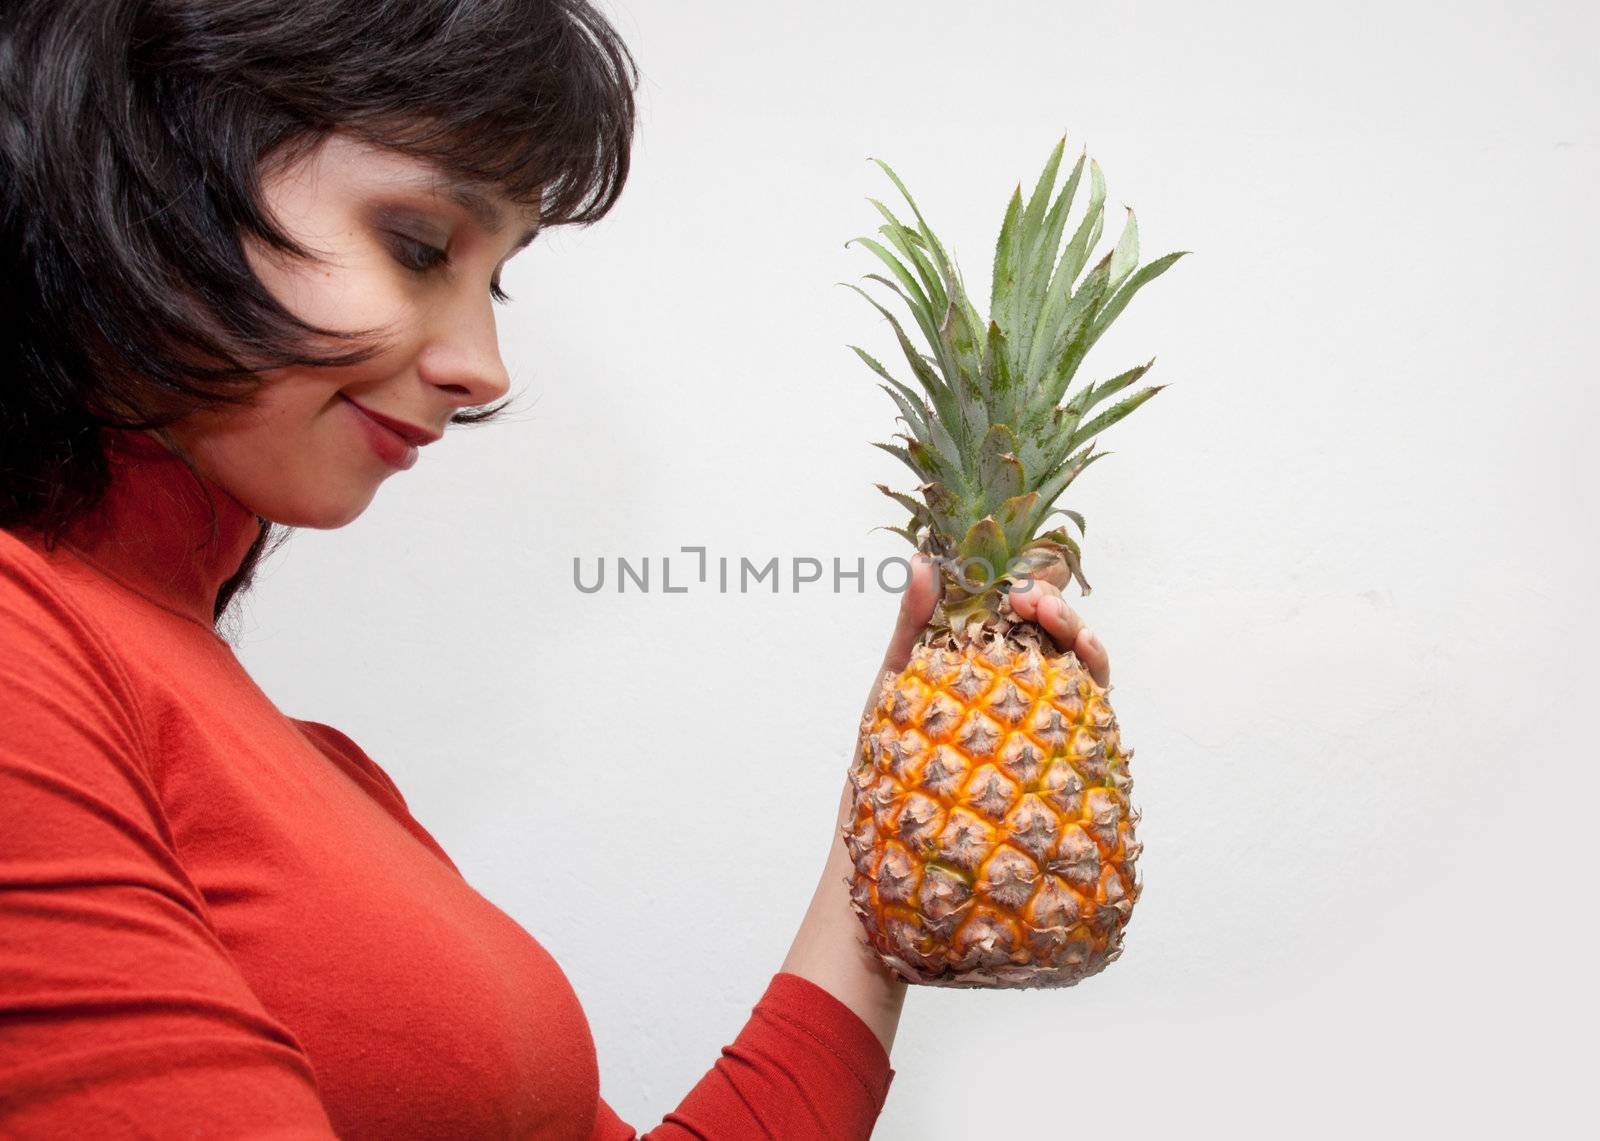 Girl with Pineapple by schankz